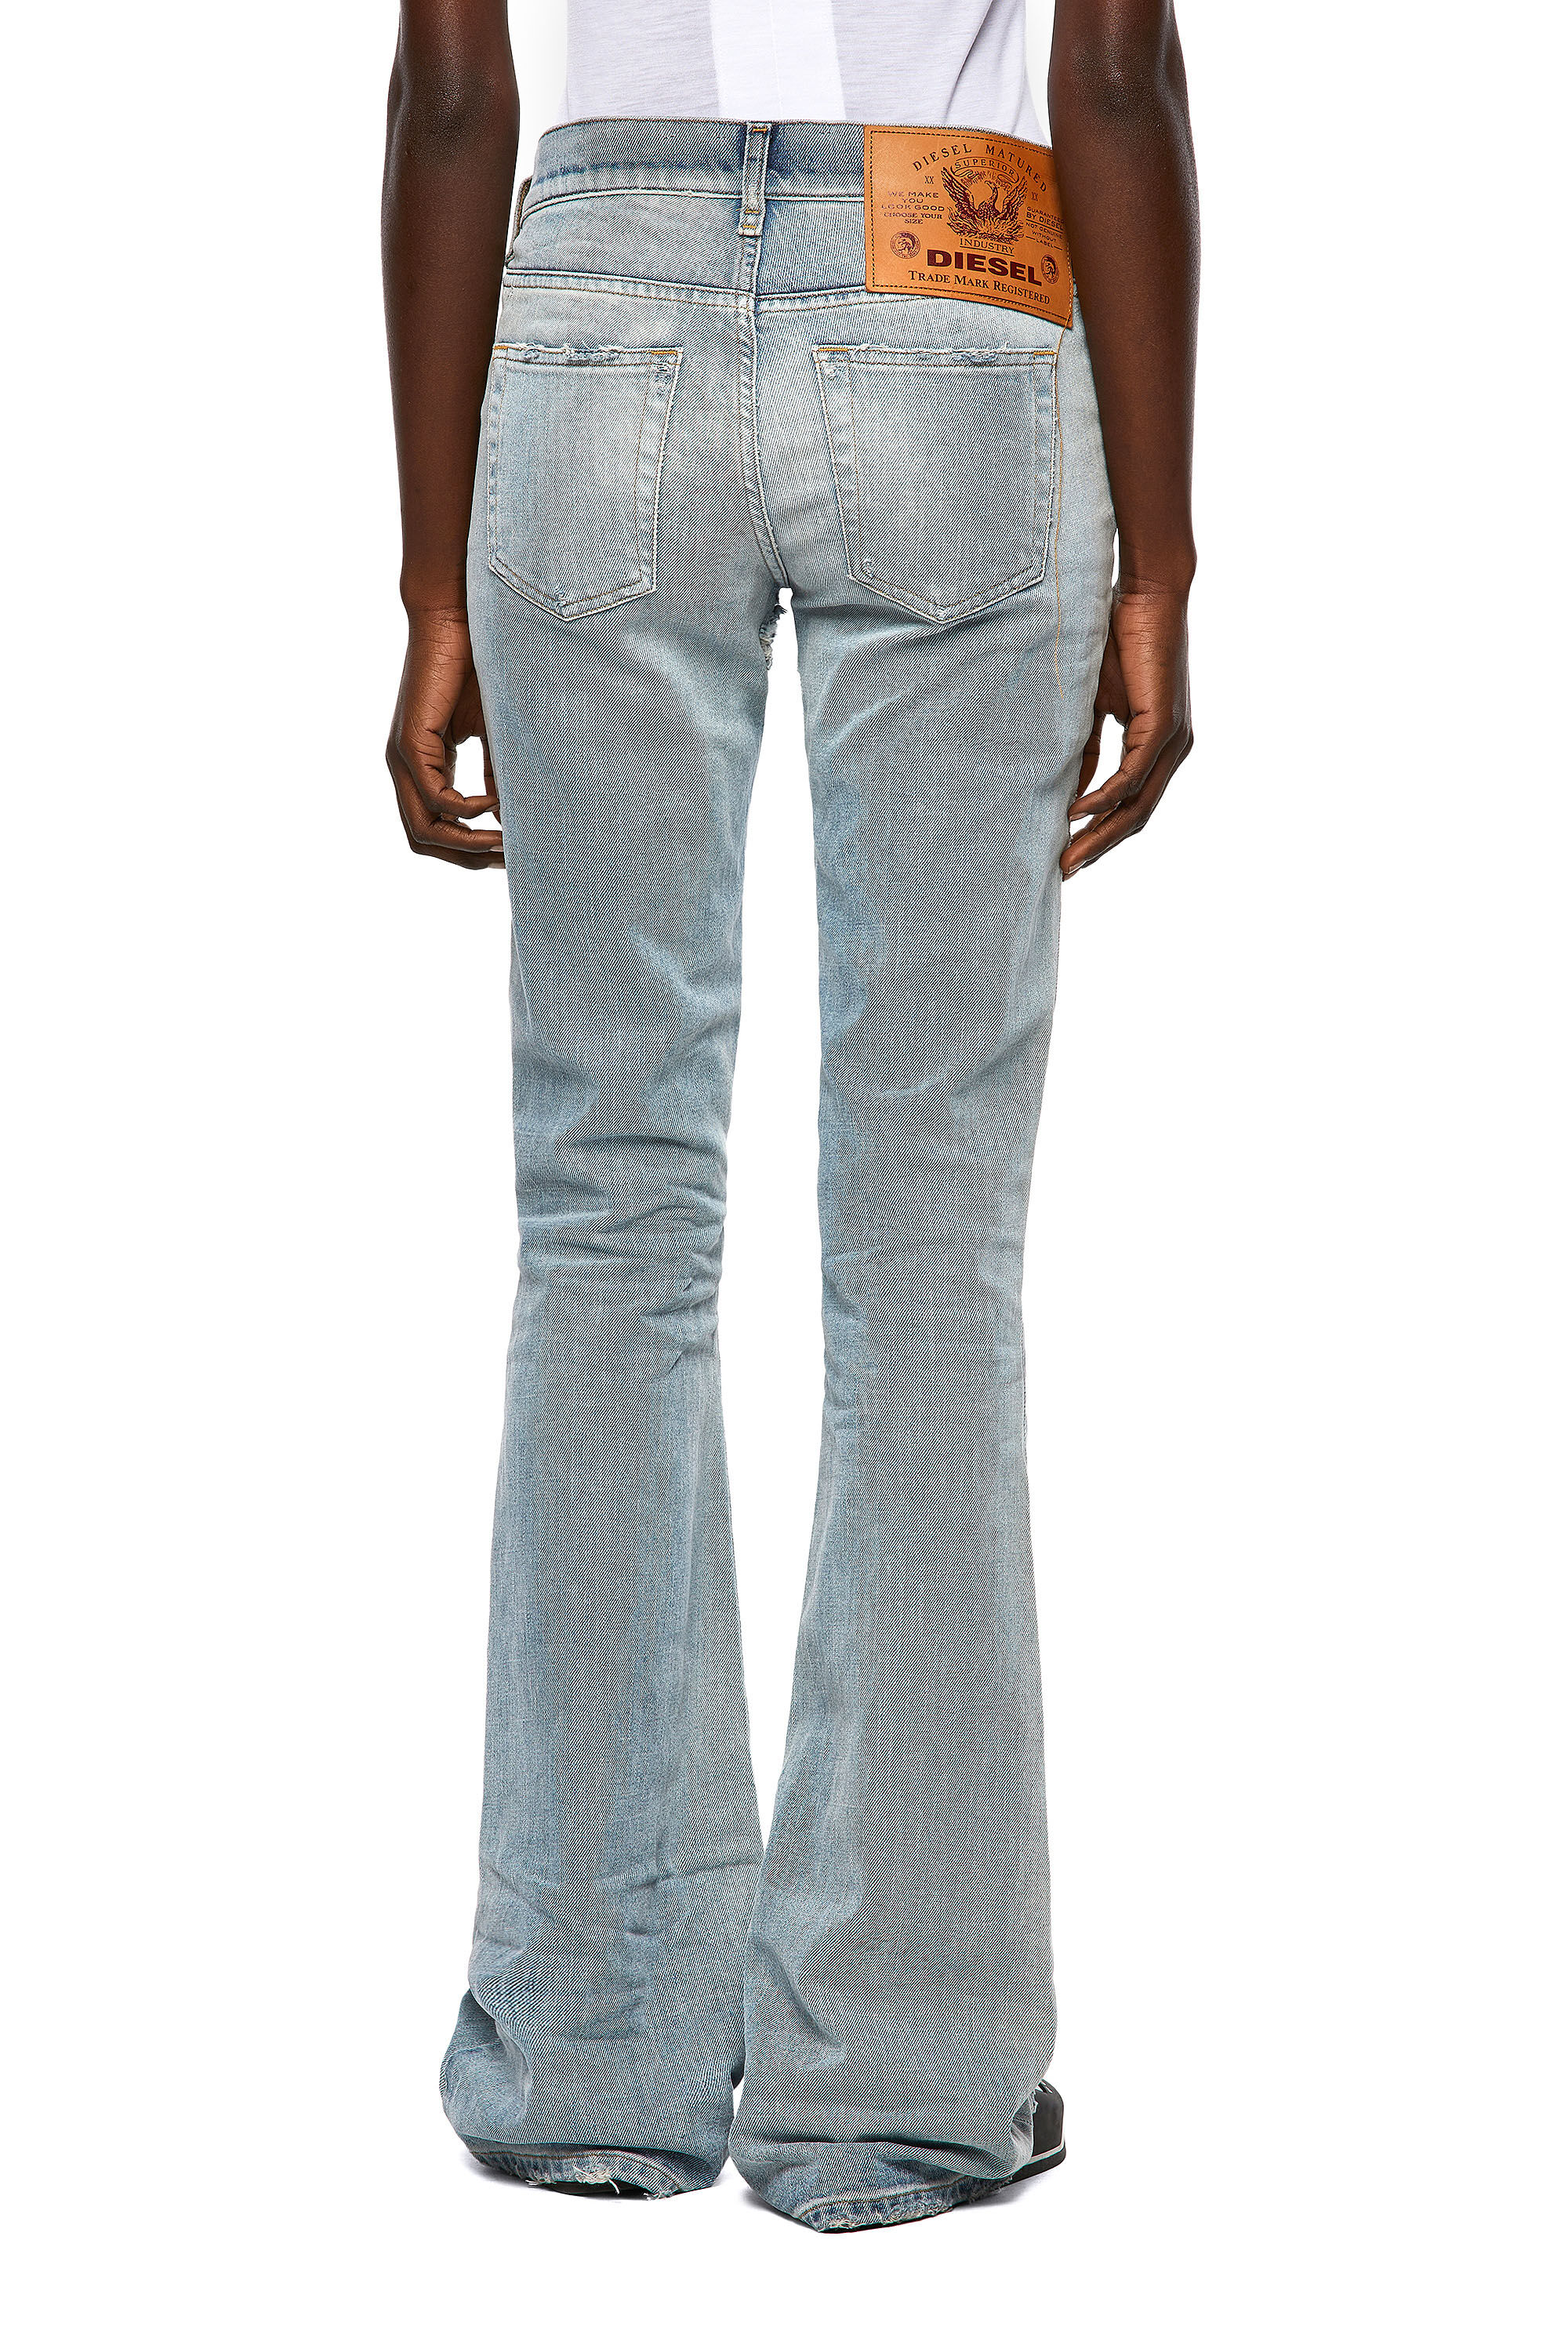 Diesel - 1969 D-EBBEY 09A04 Bootcut and Flare Jeans,  - Image 4